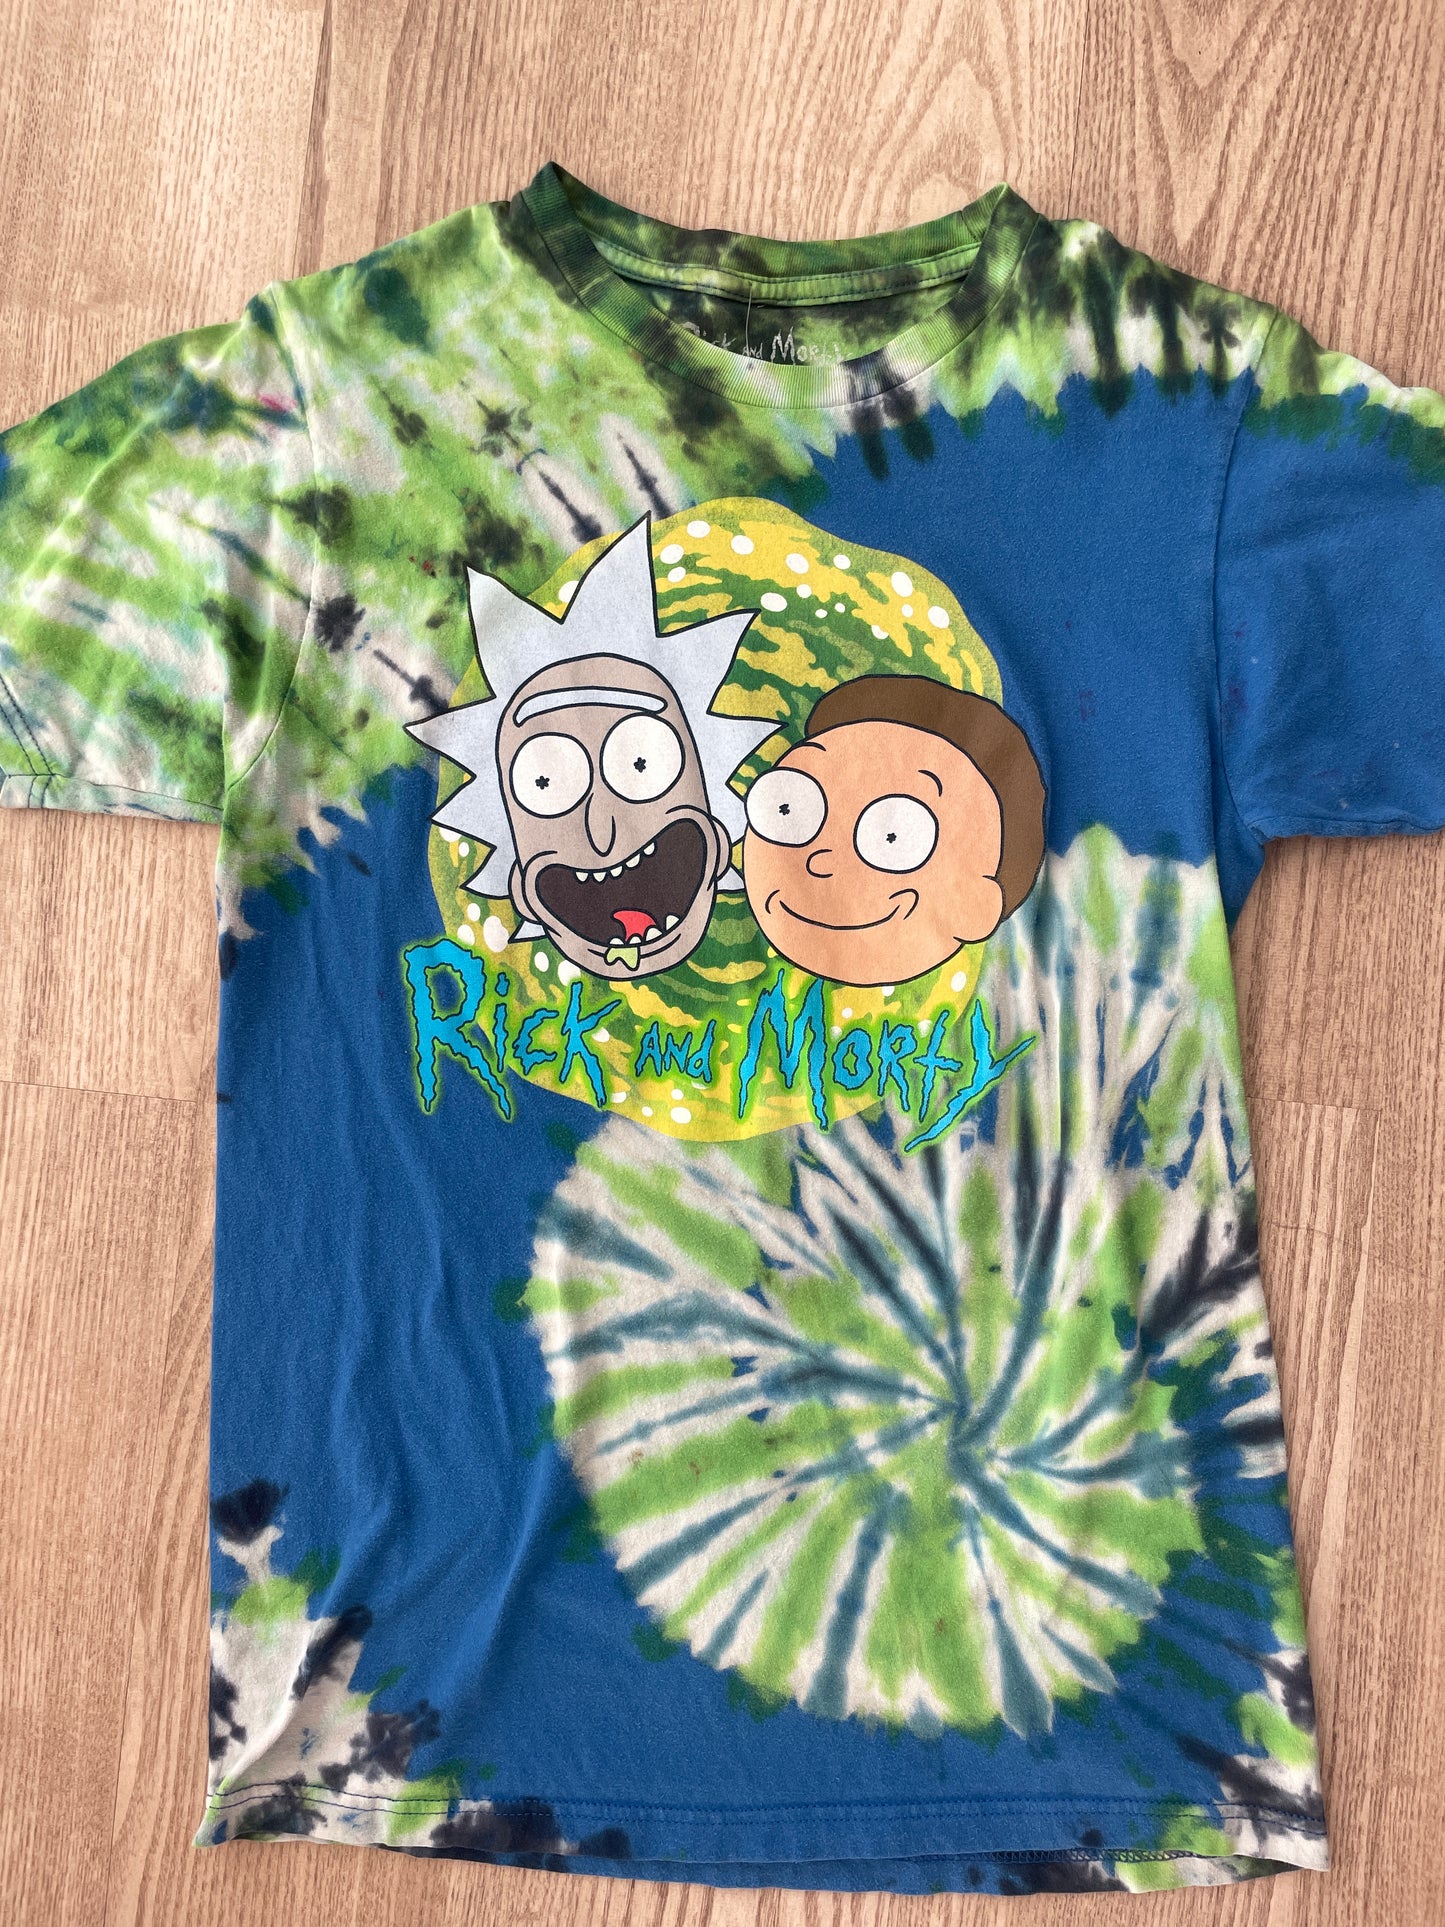 SMALL Men's Rick and Morty Reverse Tie Dye Handmade Short Sleeve T-Shirt | One-Of-a-Kind Upcycled Blue and Green Spiral Top